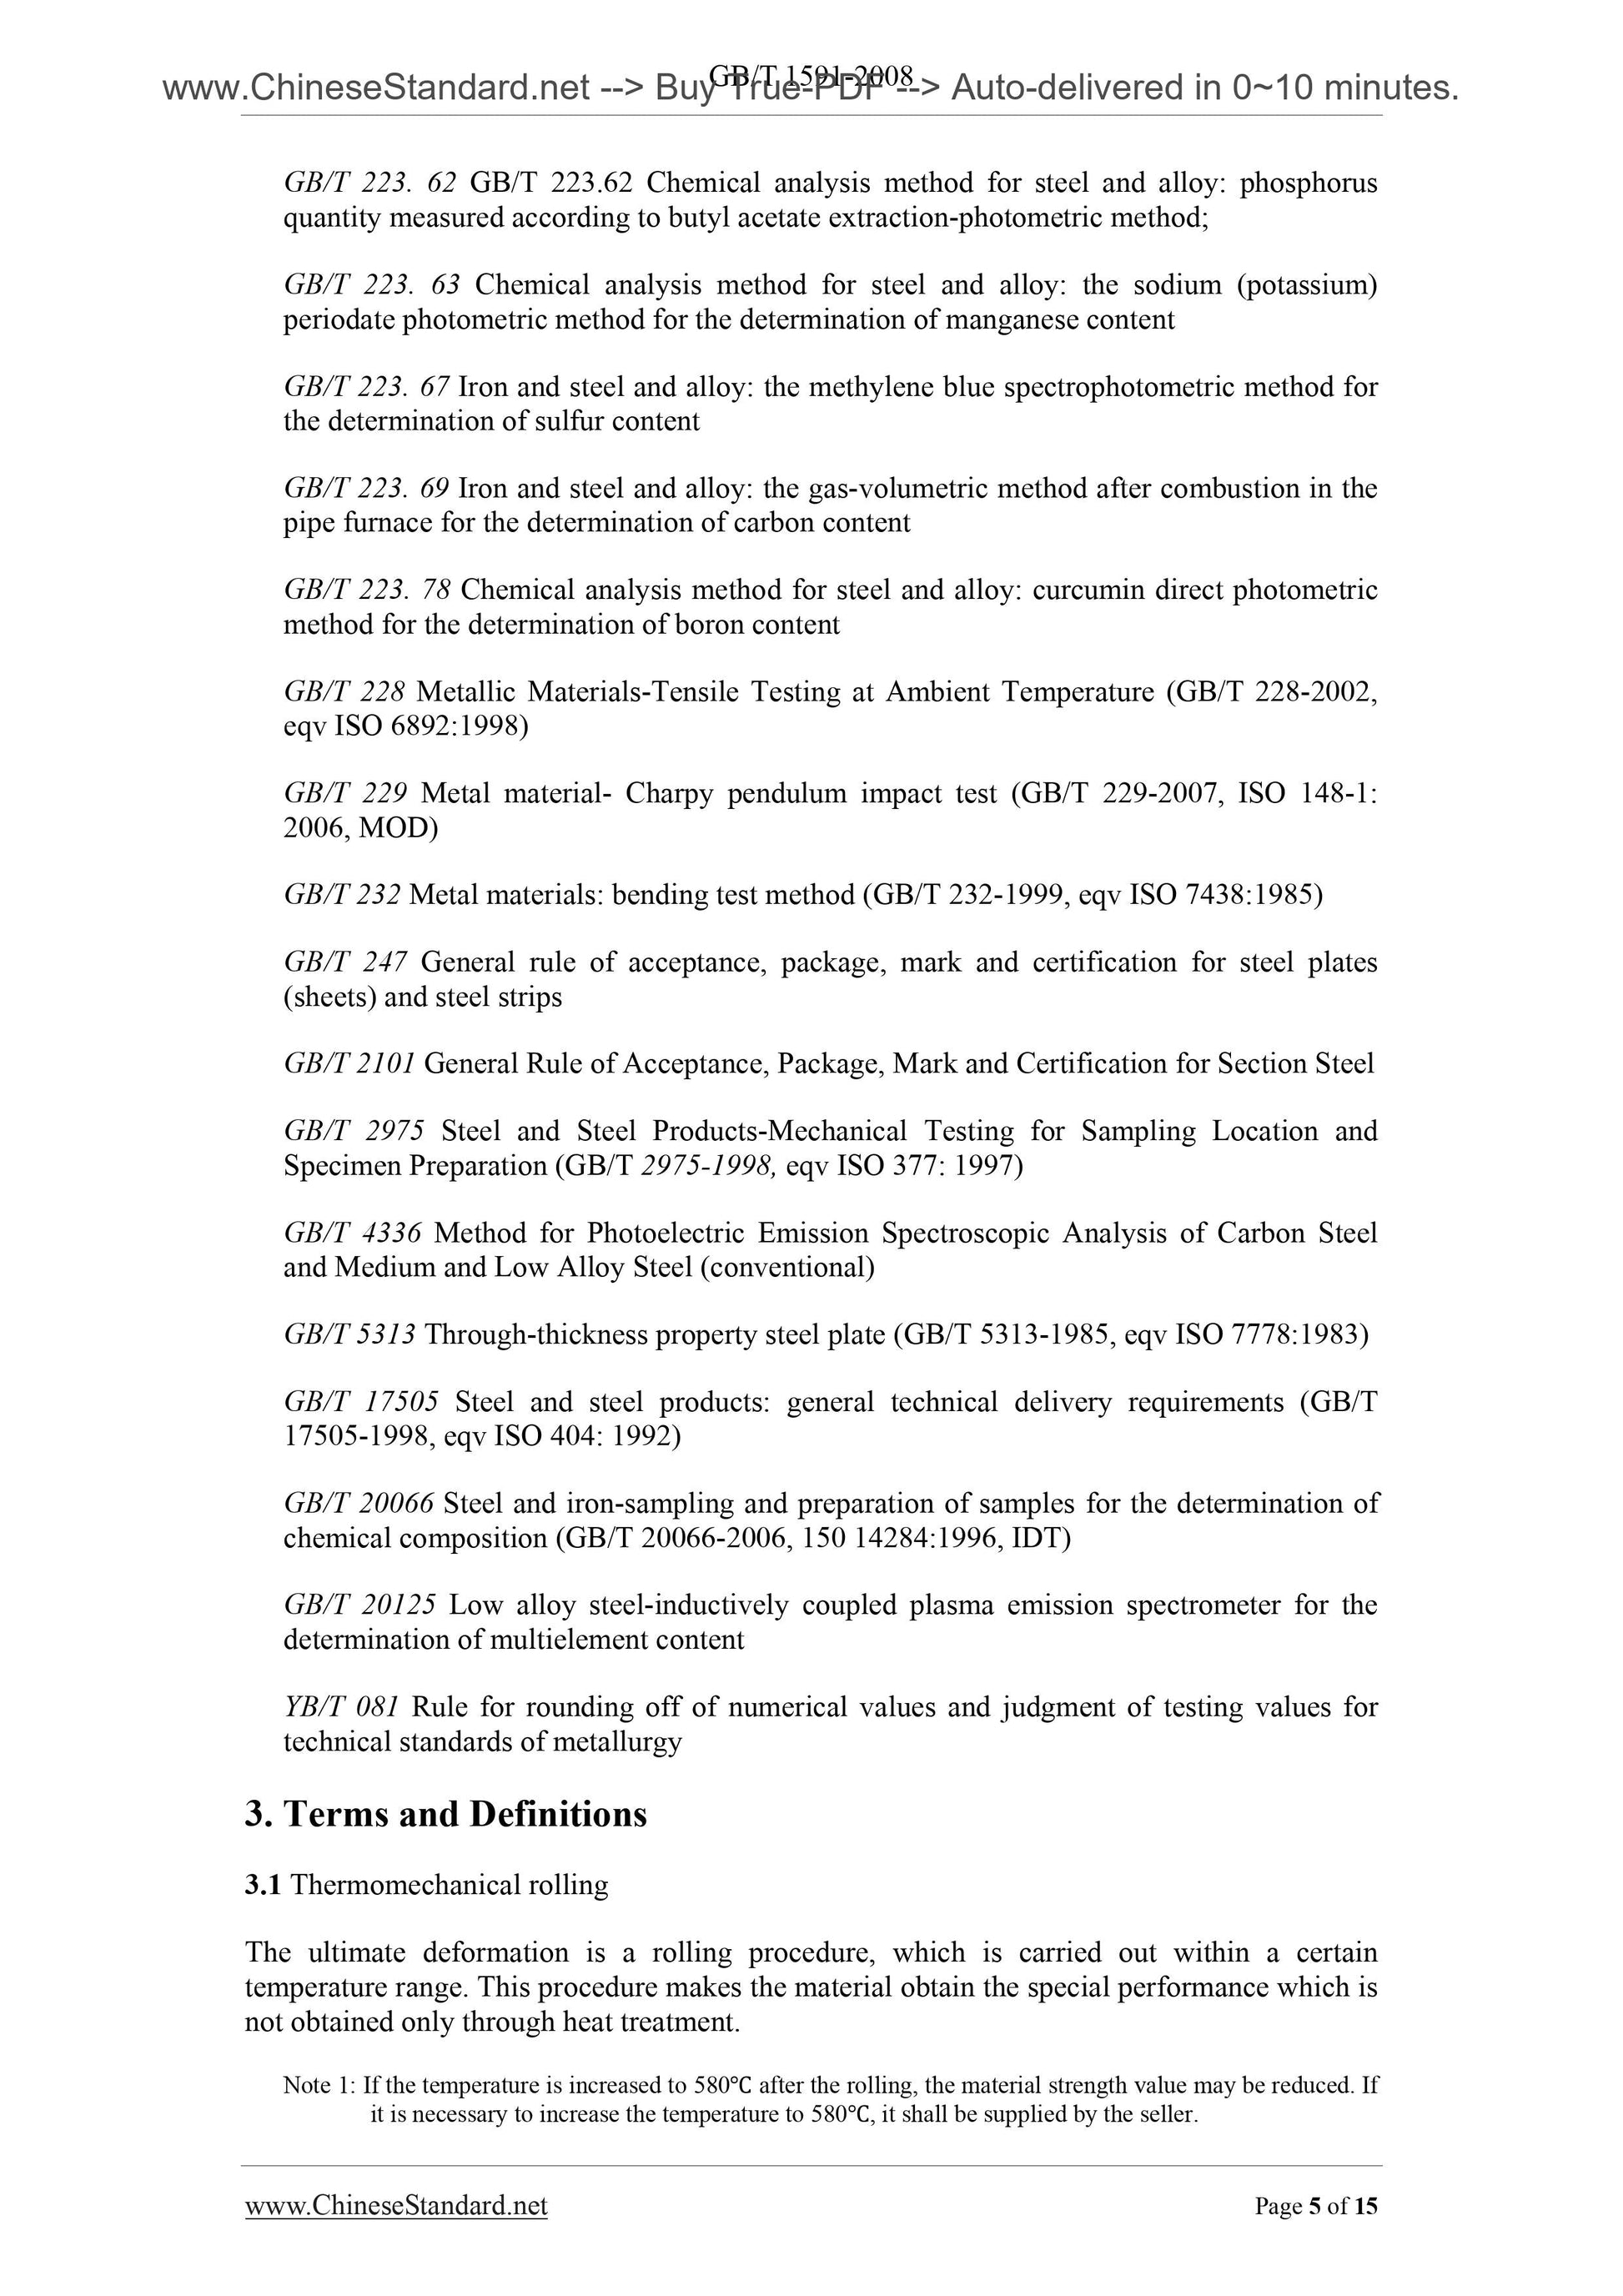 GB/T 1591-2008 Page 5